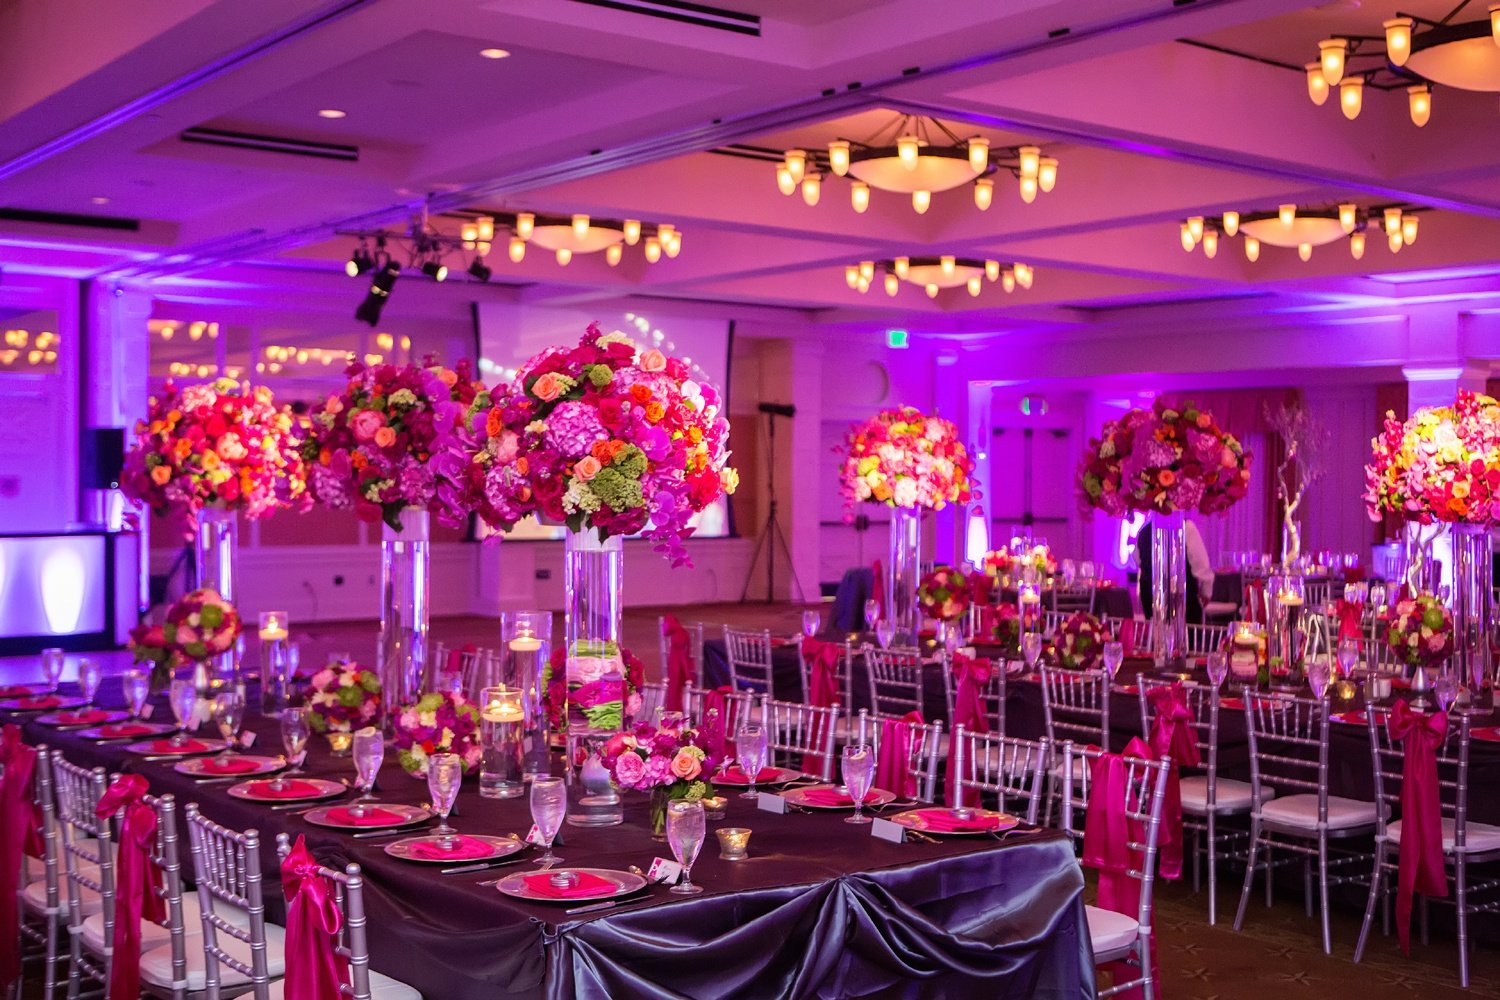 What Exactly Does An Event Planner Do? You’d Be Surprised